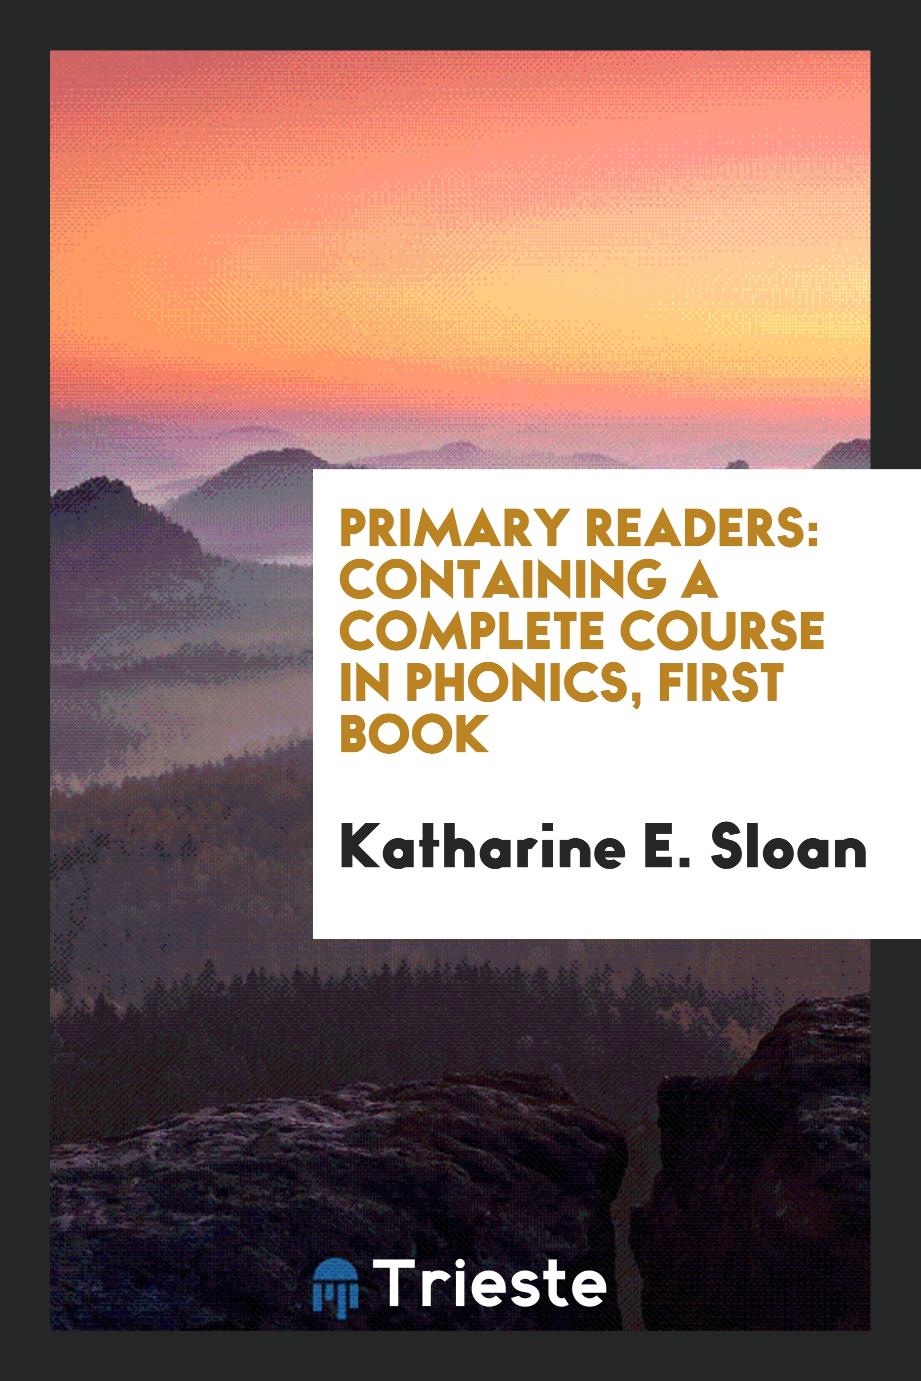 Primary Readers: Containing a Complete Course in Phonics, First Book